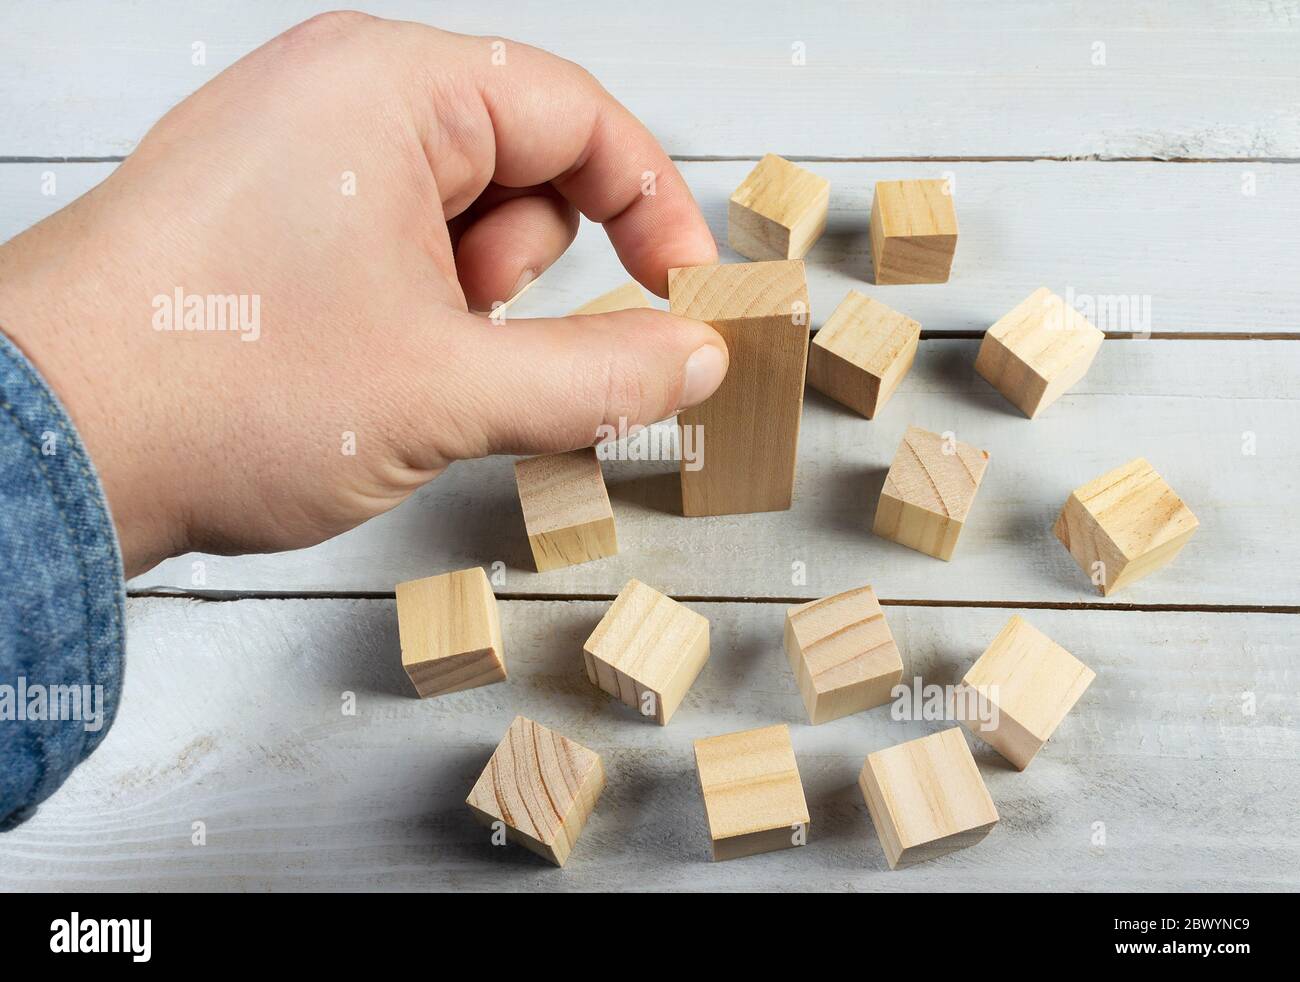 Concept photo of hand in jeans shirt putting a bigger wooden block in surrounding of a smaller ones on a table surface background. Stock Photo